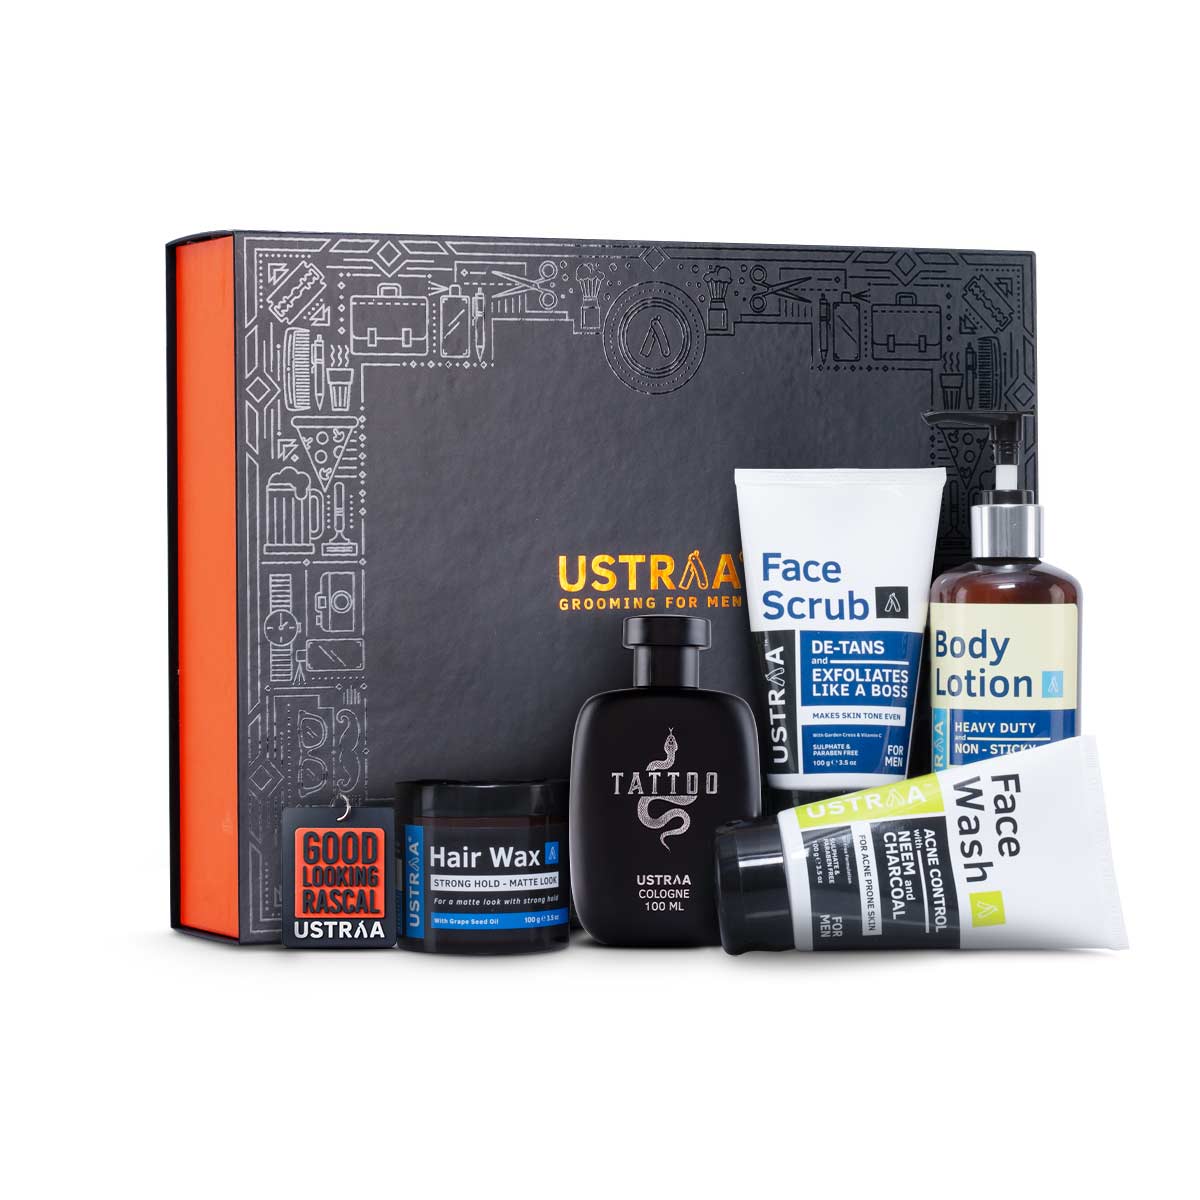 Ustraa Swag Pack For Men: Face Wash + Face Scrub + Body Lotion + Hair Wax- Matte + Cologne- Tattoo